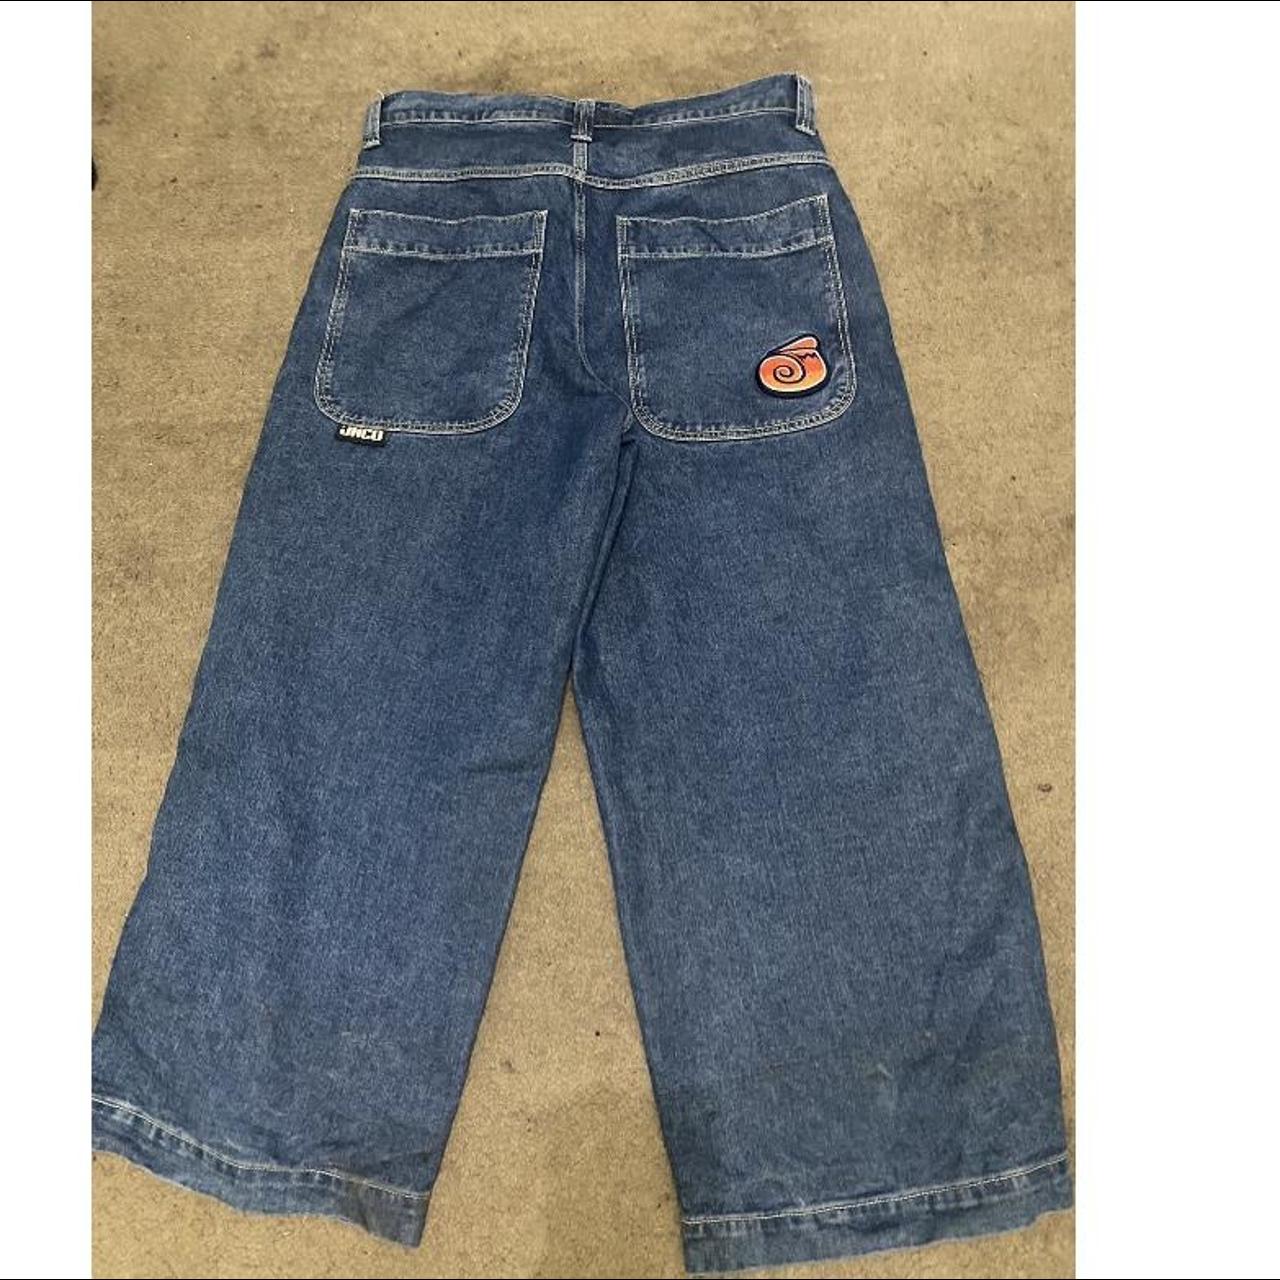 JNCO TWIN CANNON jncos perfect baggy fit not worn a... - Depop